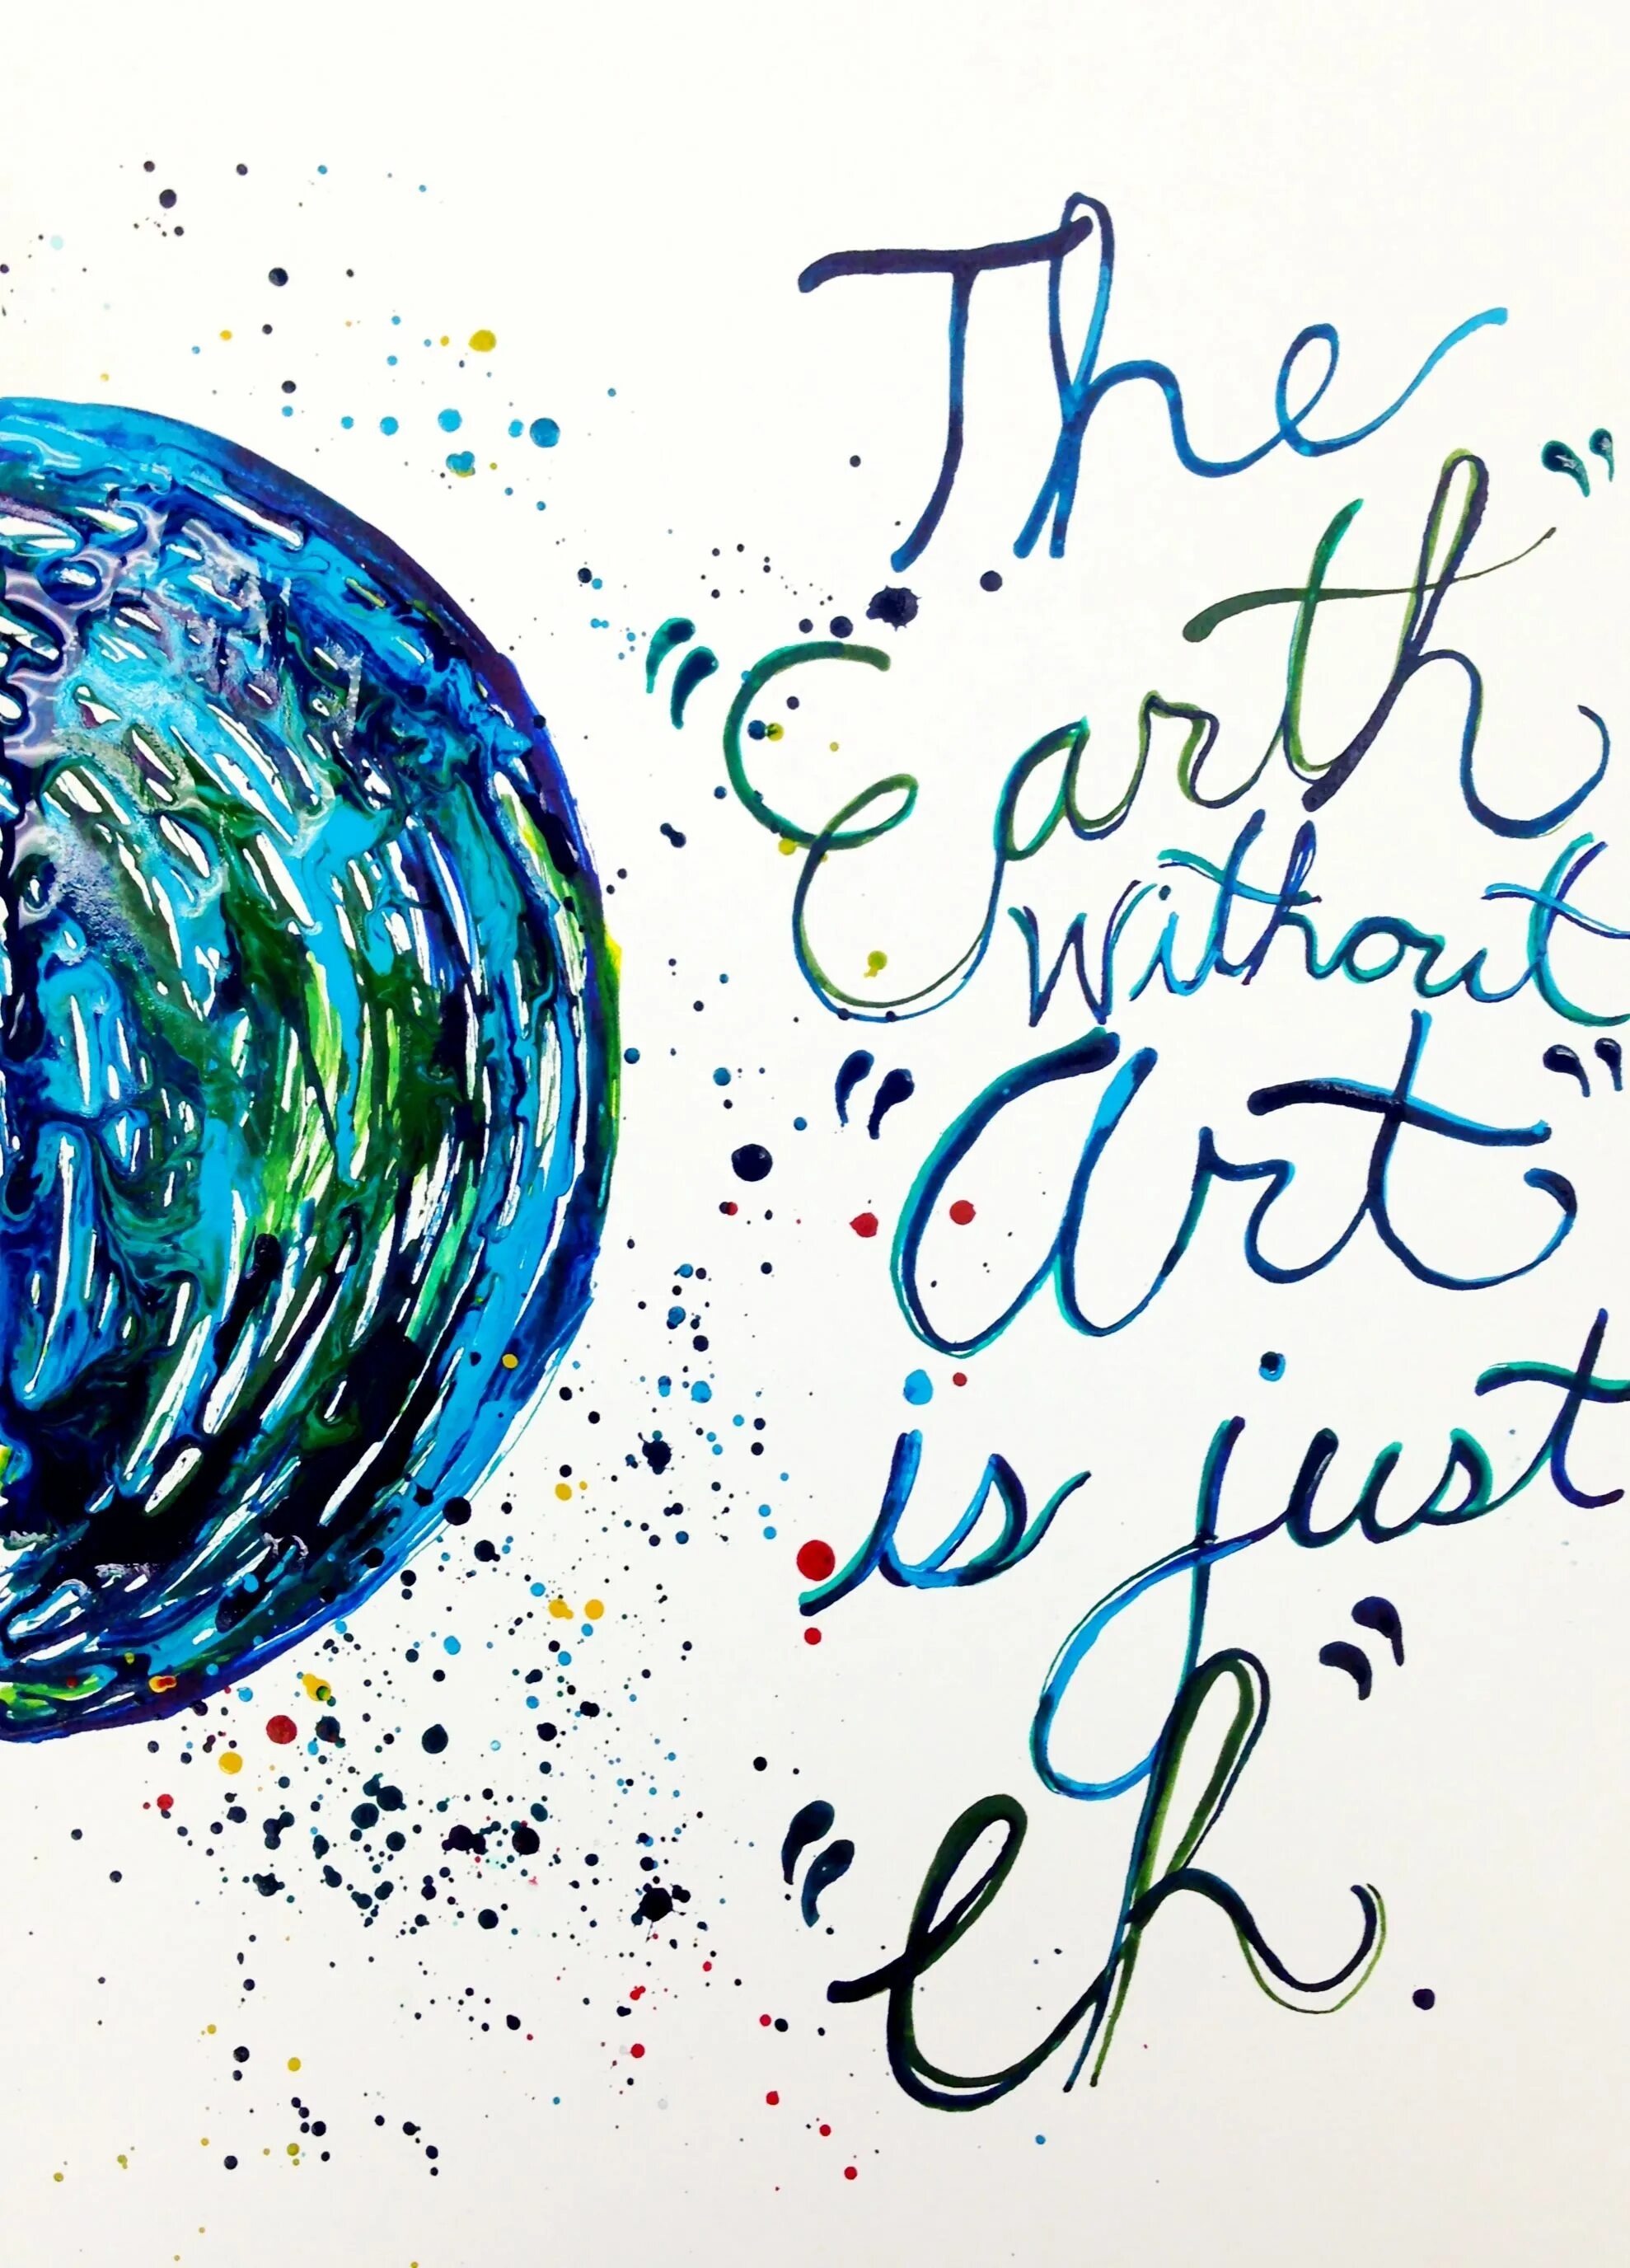 Without art. Earth without Art is just eh. Earth without Art. Art is. The Earth without Art футболка.